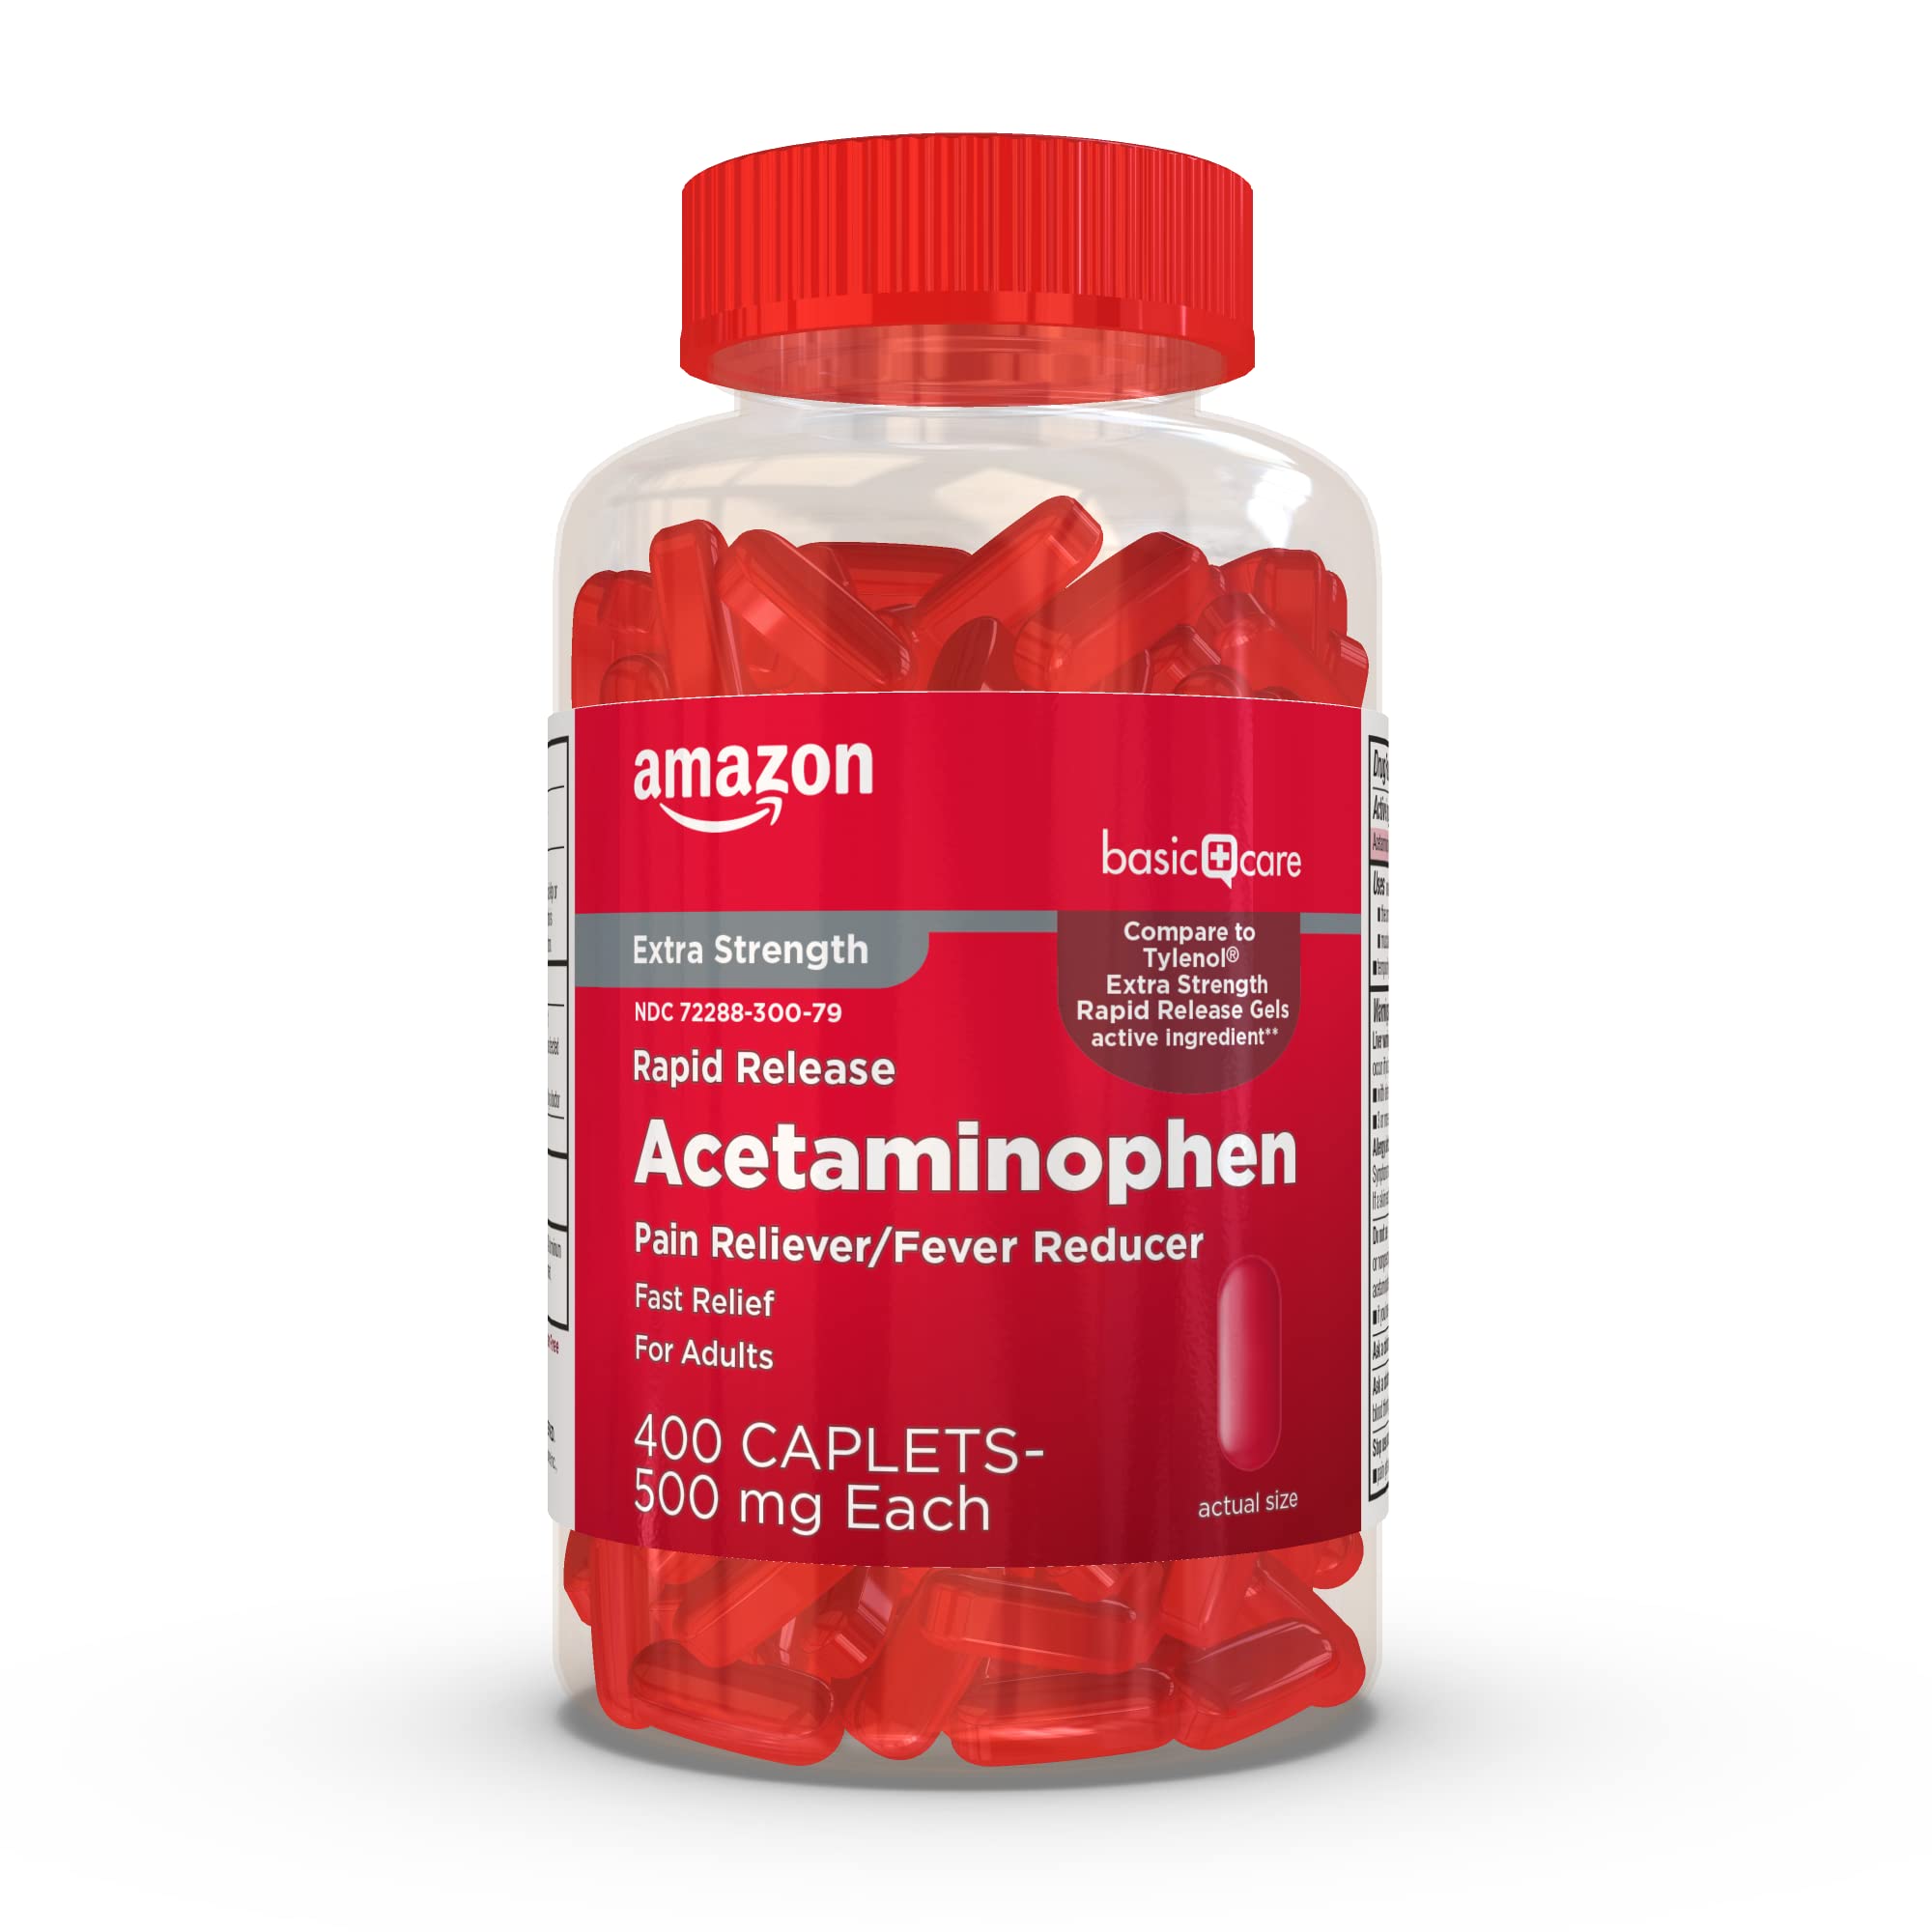 Amazon Basic Care Rapid Release Acetaminophen Caplets 500 mg, Extra Strength Pain Reliever and Fever Reducer, 400 Count